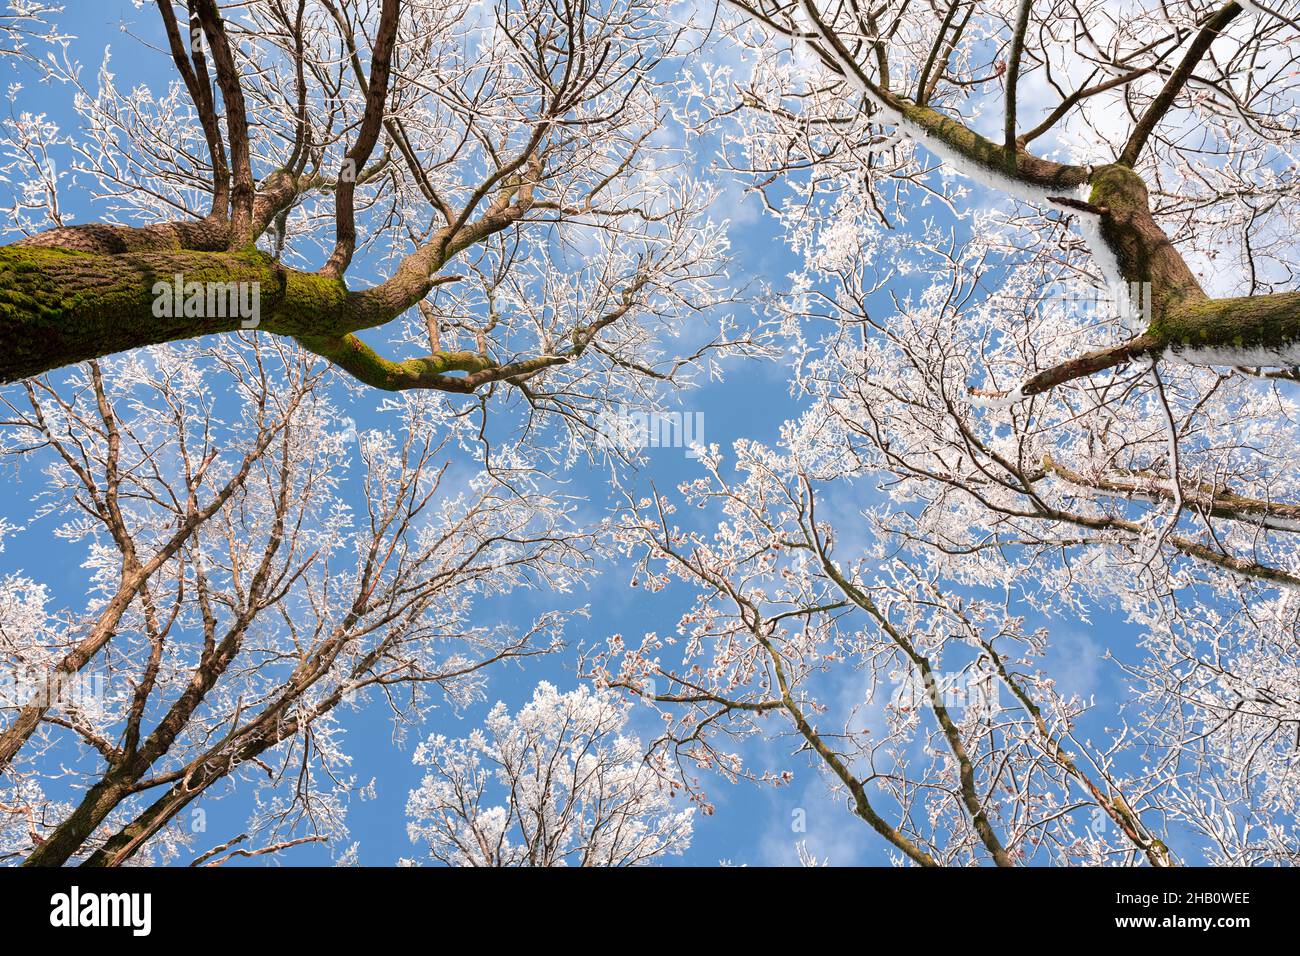 Bottom view on a f winter snowy trees in the blue sky. Frosty branches with hoarfrost twigs in a sunny day. Landscape photography Stock Photo